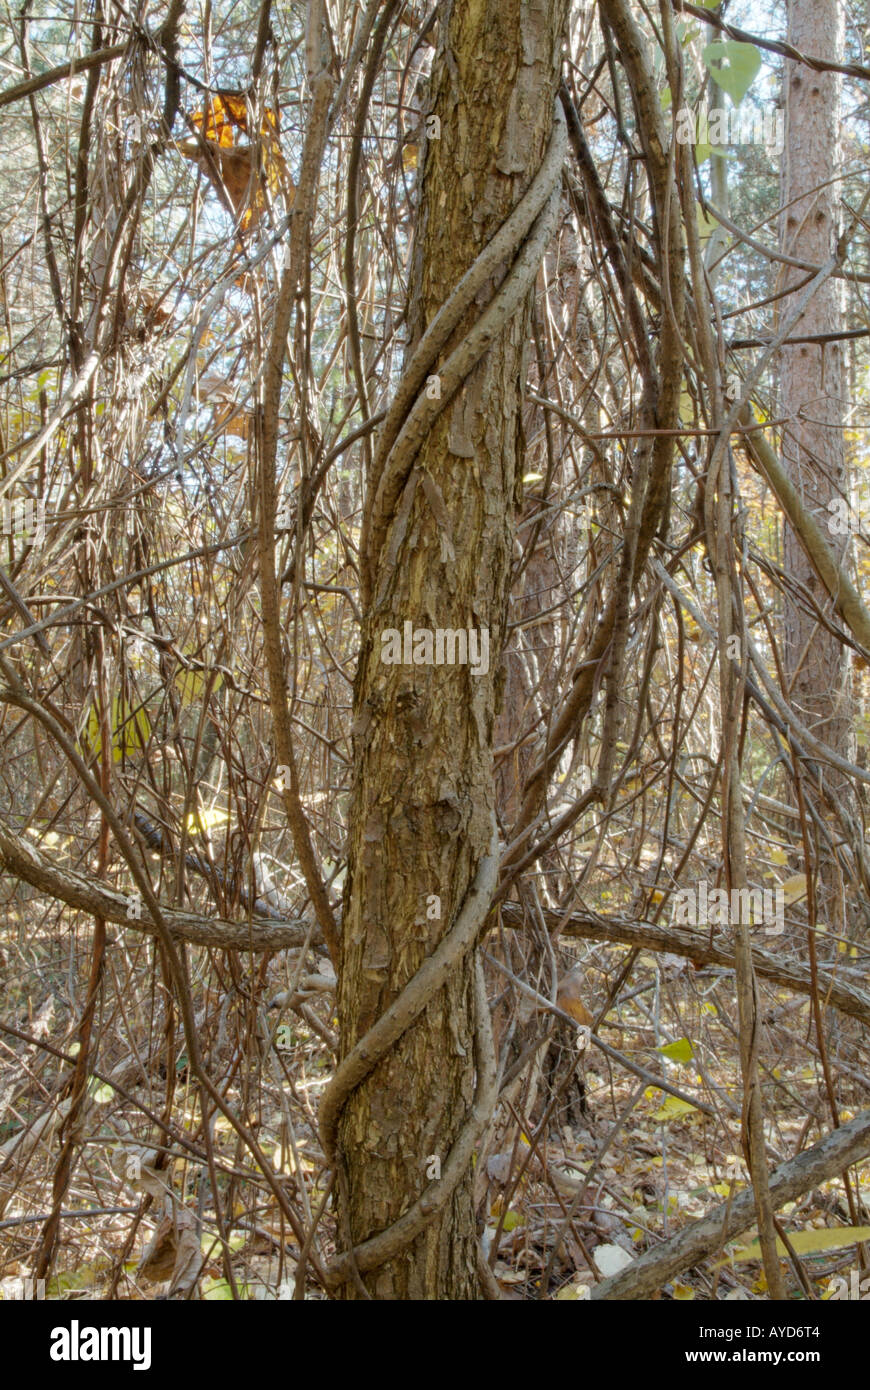 Vines wrapped around a small tree in a New England USA forest Stock Photo